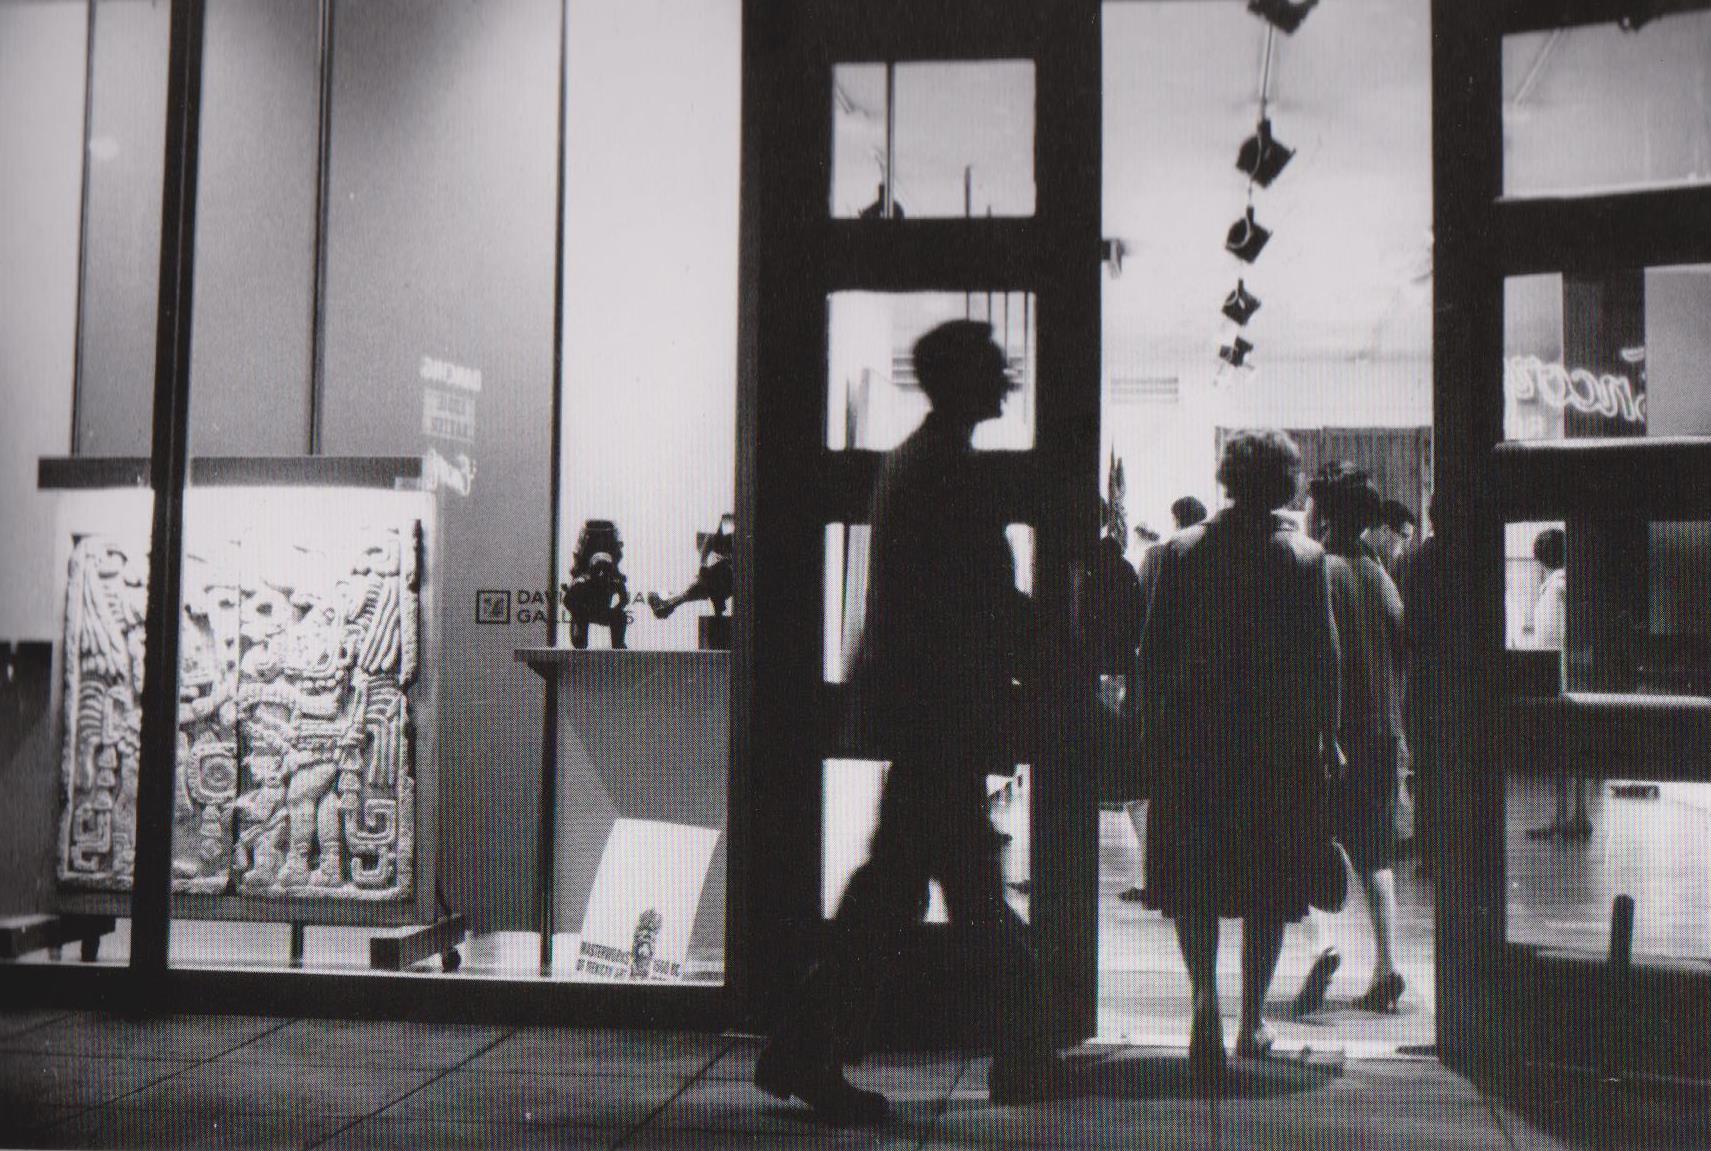 The David Stuart Gallery at 807 N. La Cienega Blvd. during a Monday Night Art Walk in 1963. (Photo by William Claxton, courtesy of Demont Photo Management LLC)